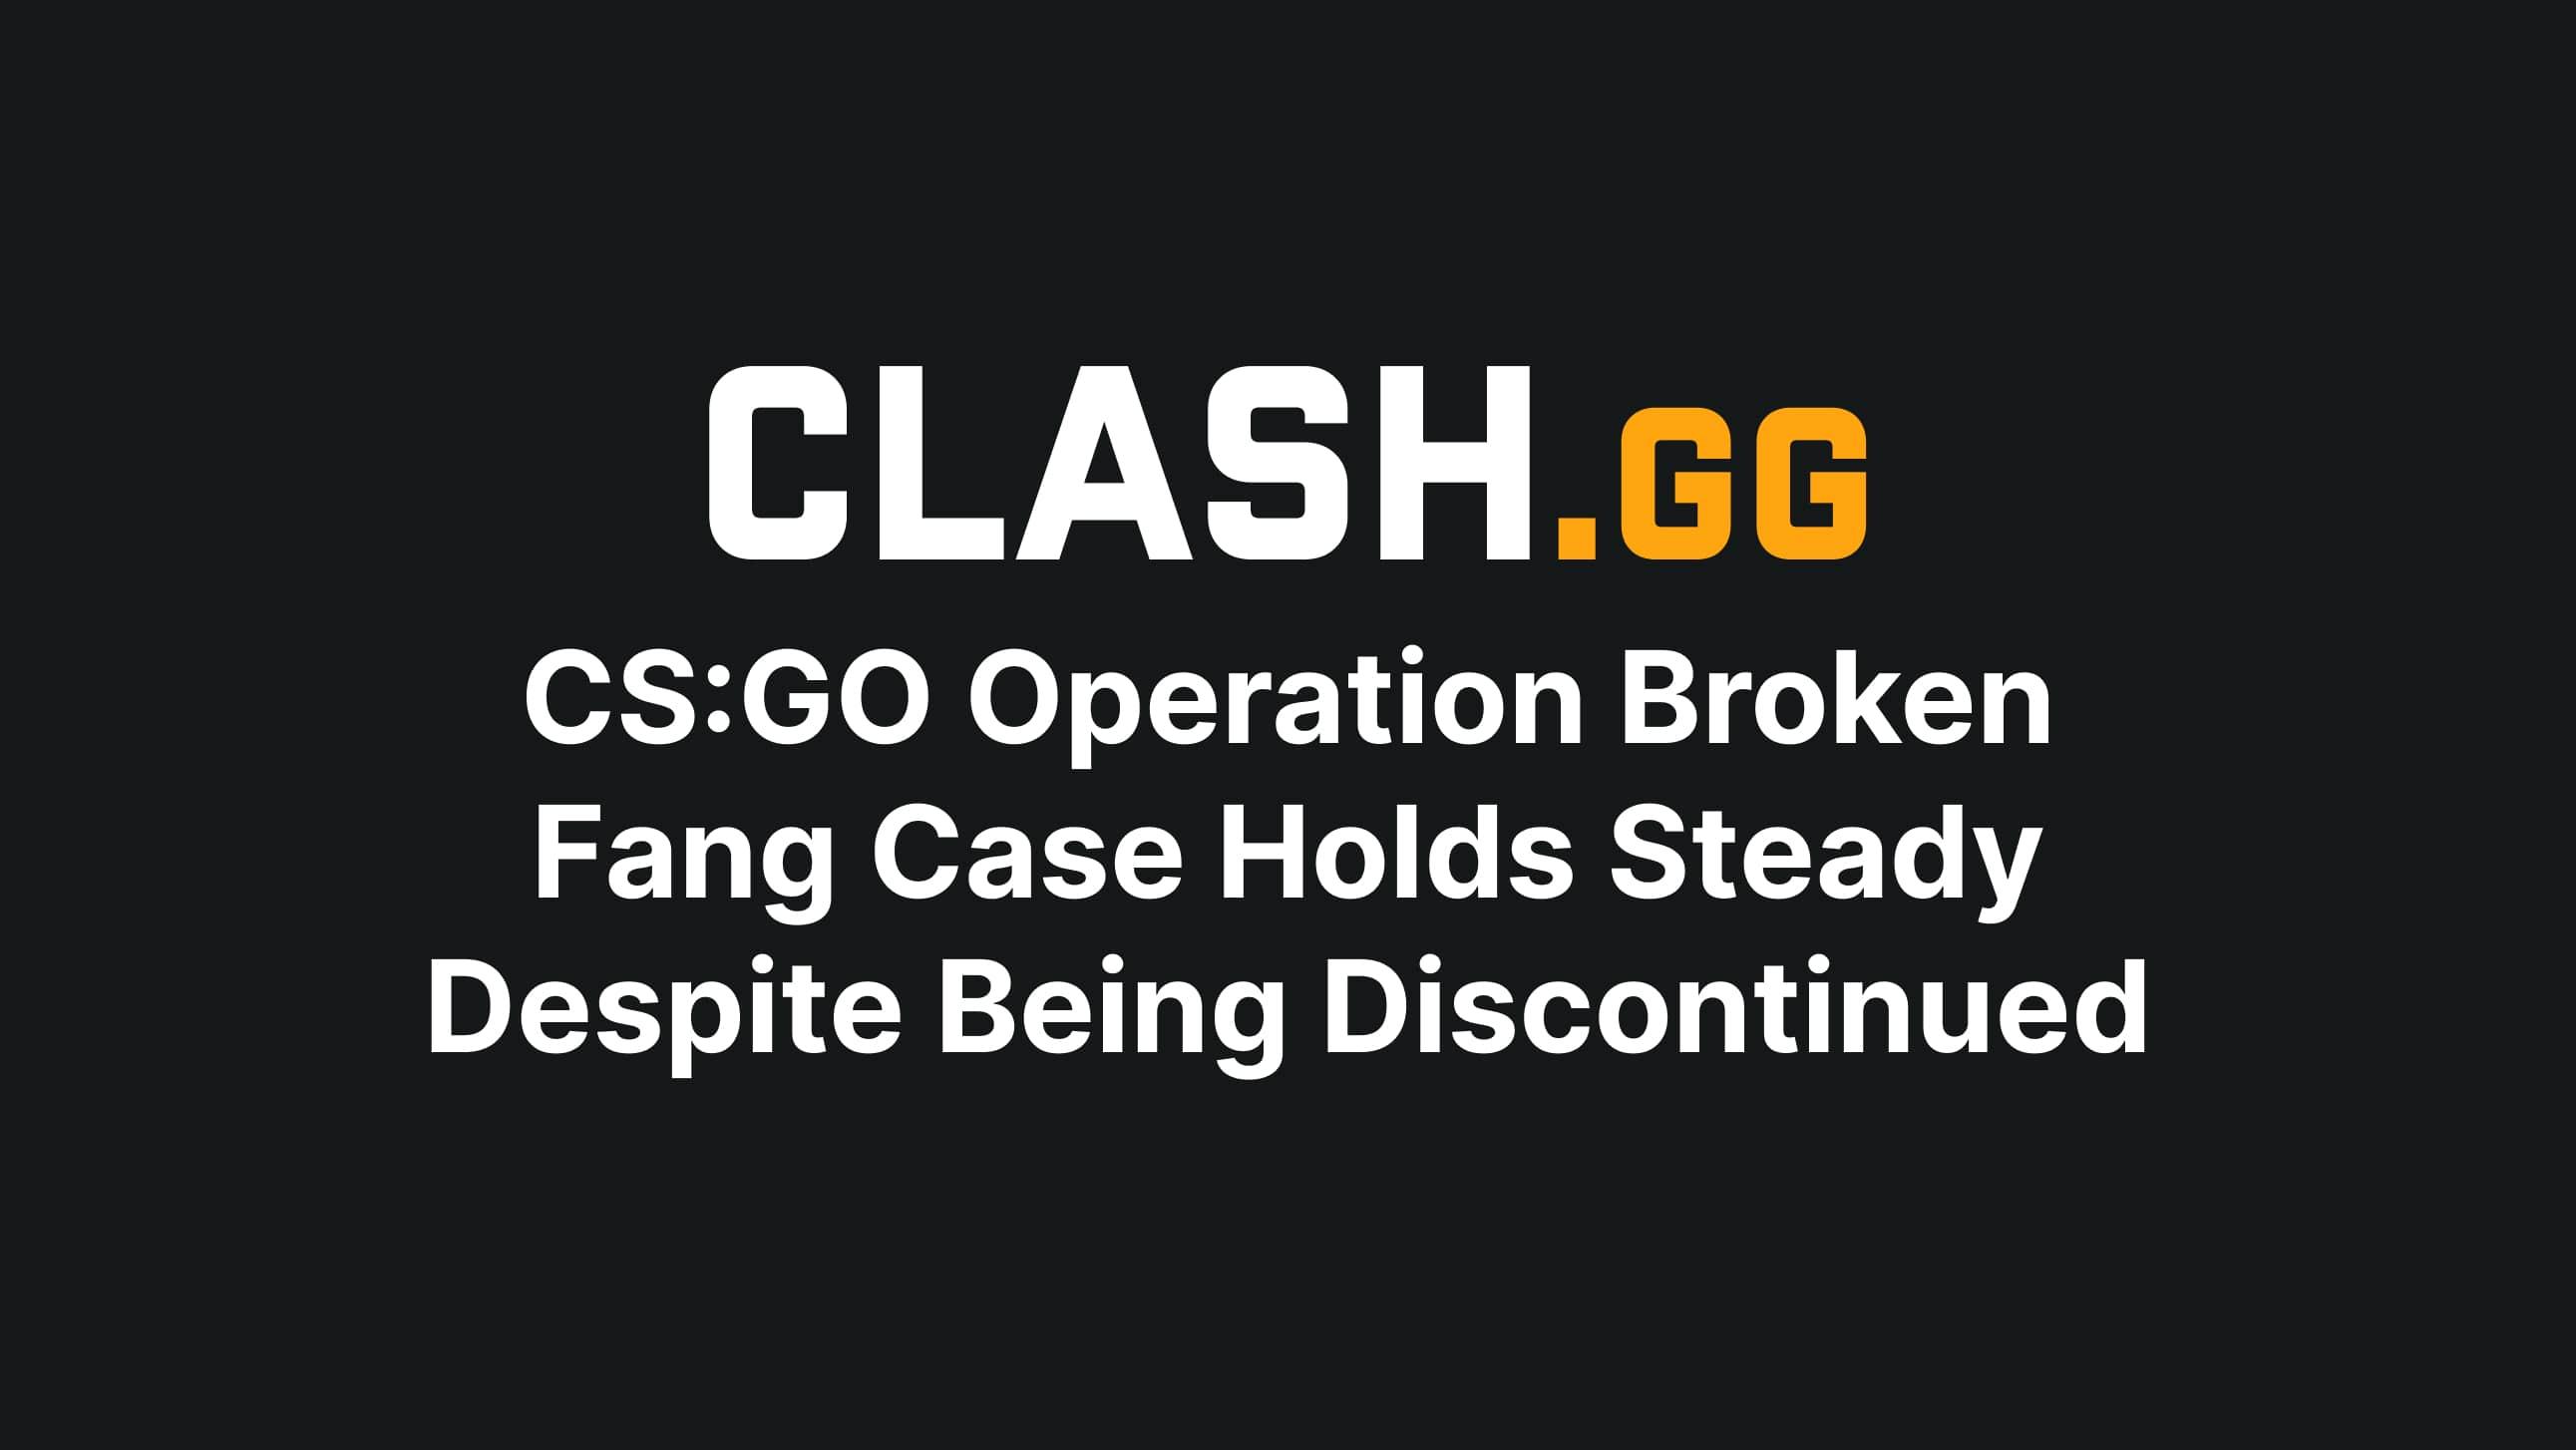 CS:GO Operation Broken Fang Case Holds Steady Despite Being Discontinued